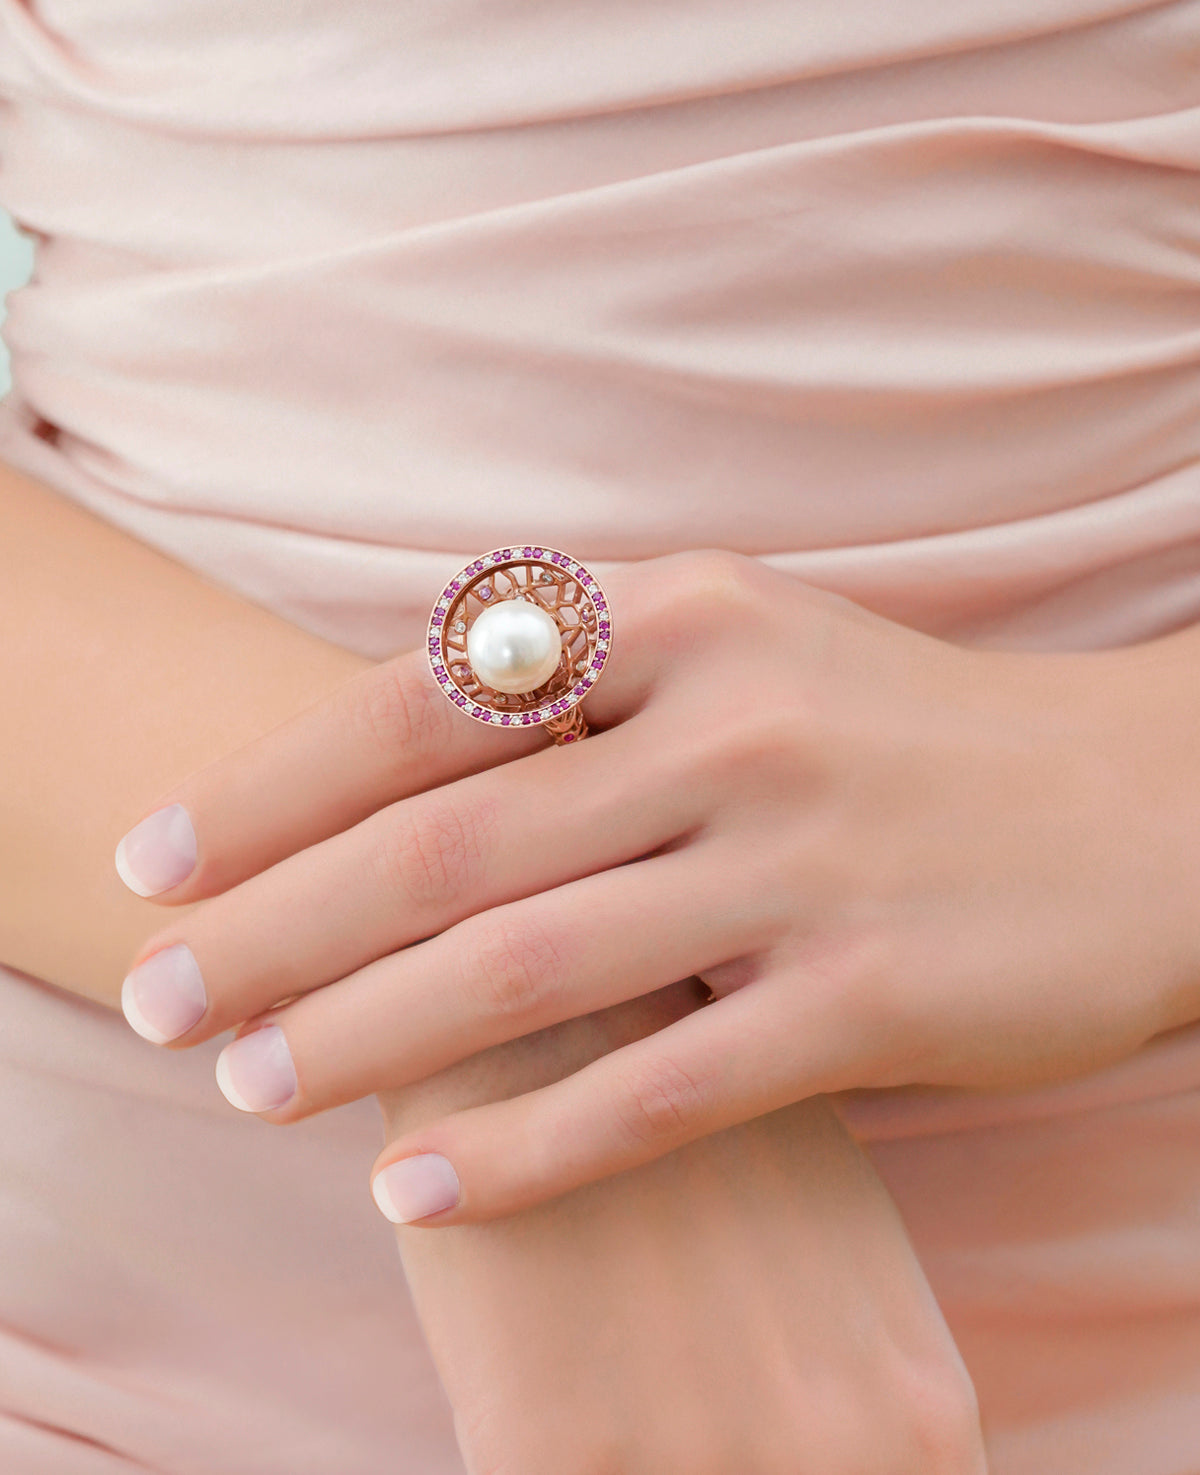 The Mythical Planet Ring - Parallax Pink